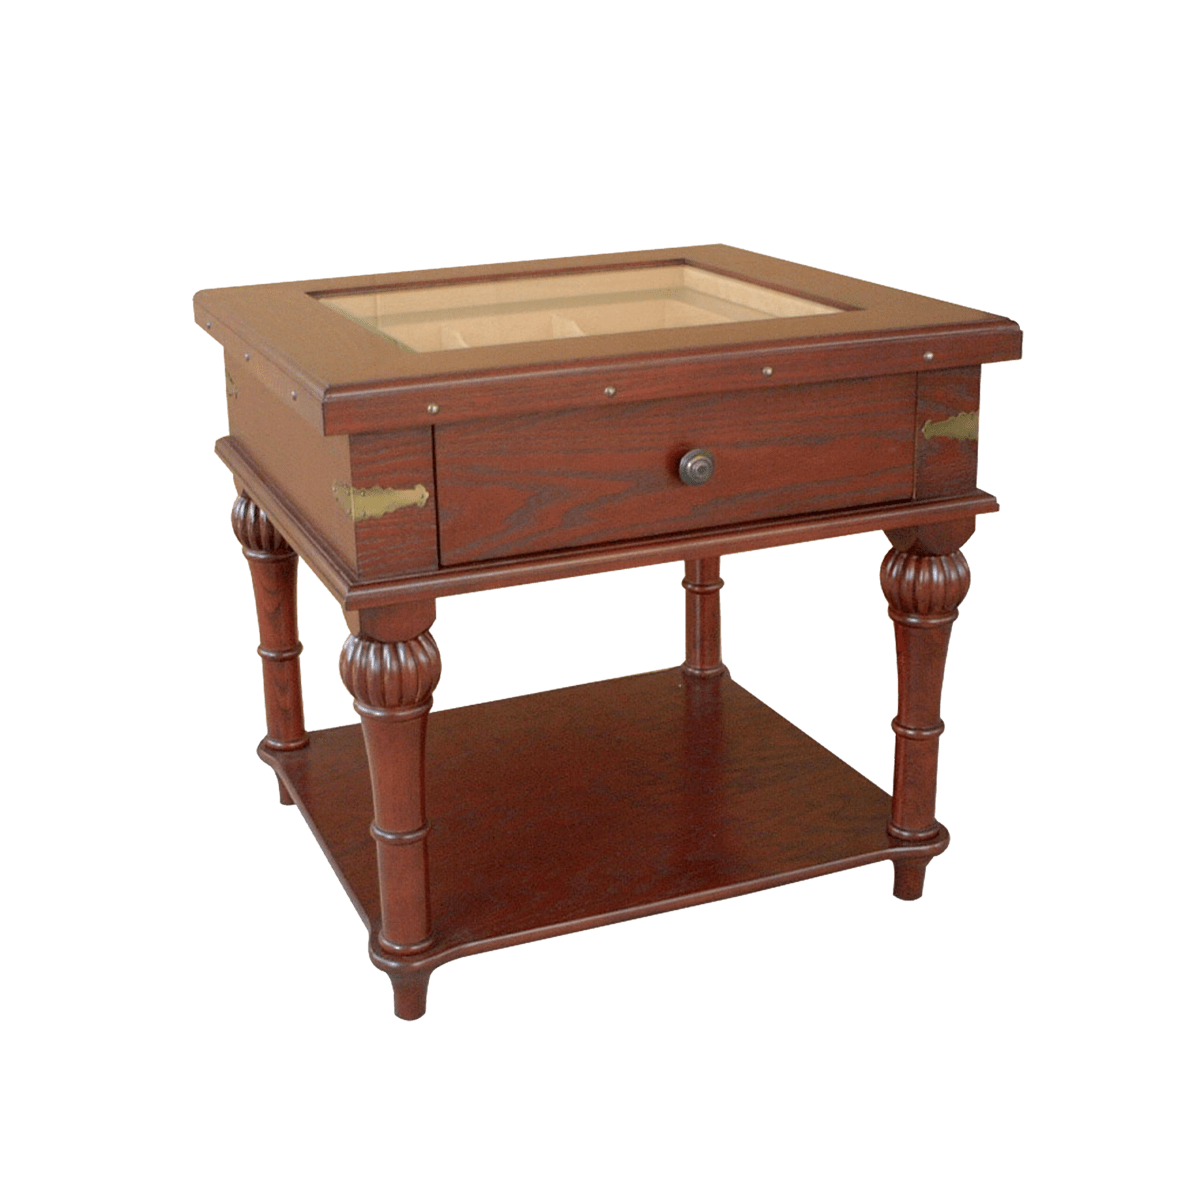 Scottsdale End Table Humidor | Holds 300 Cigars HUM-300ET Cigar Humidors HUM-300ET Luxury Appliances Direct